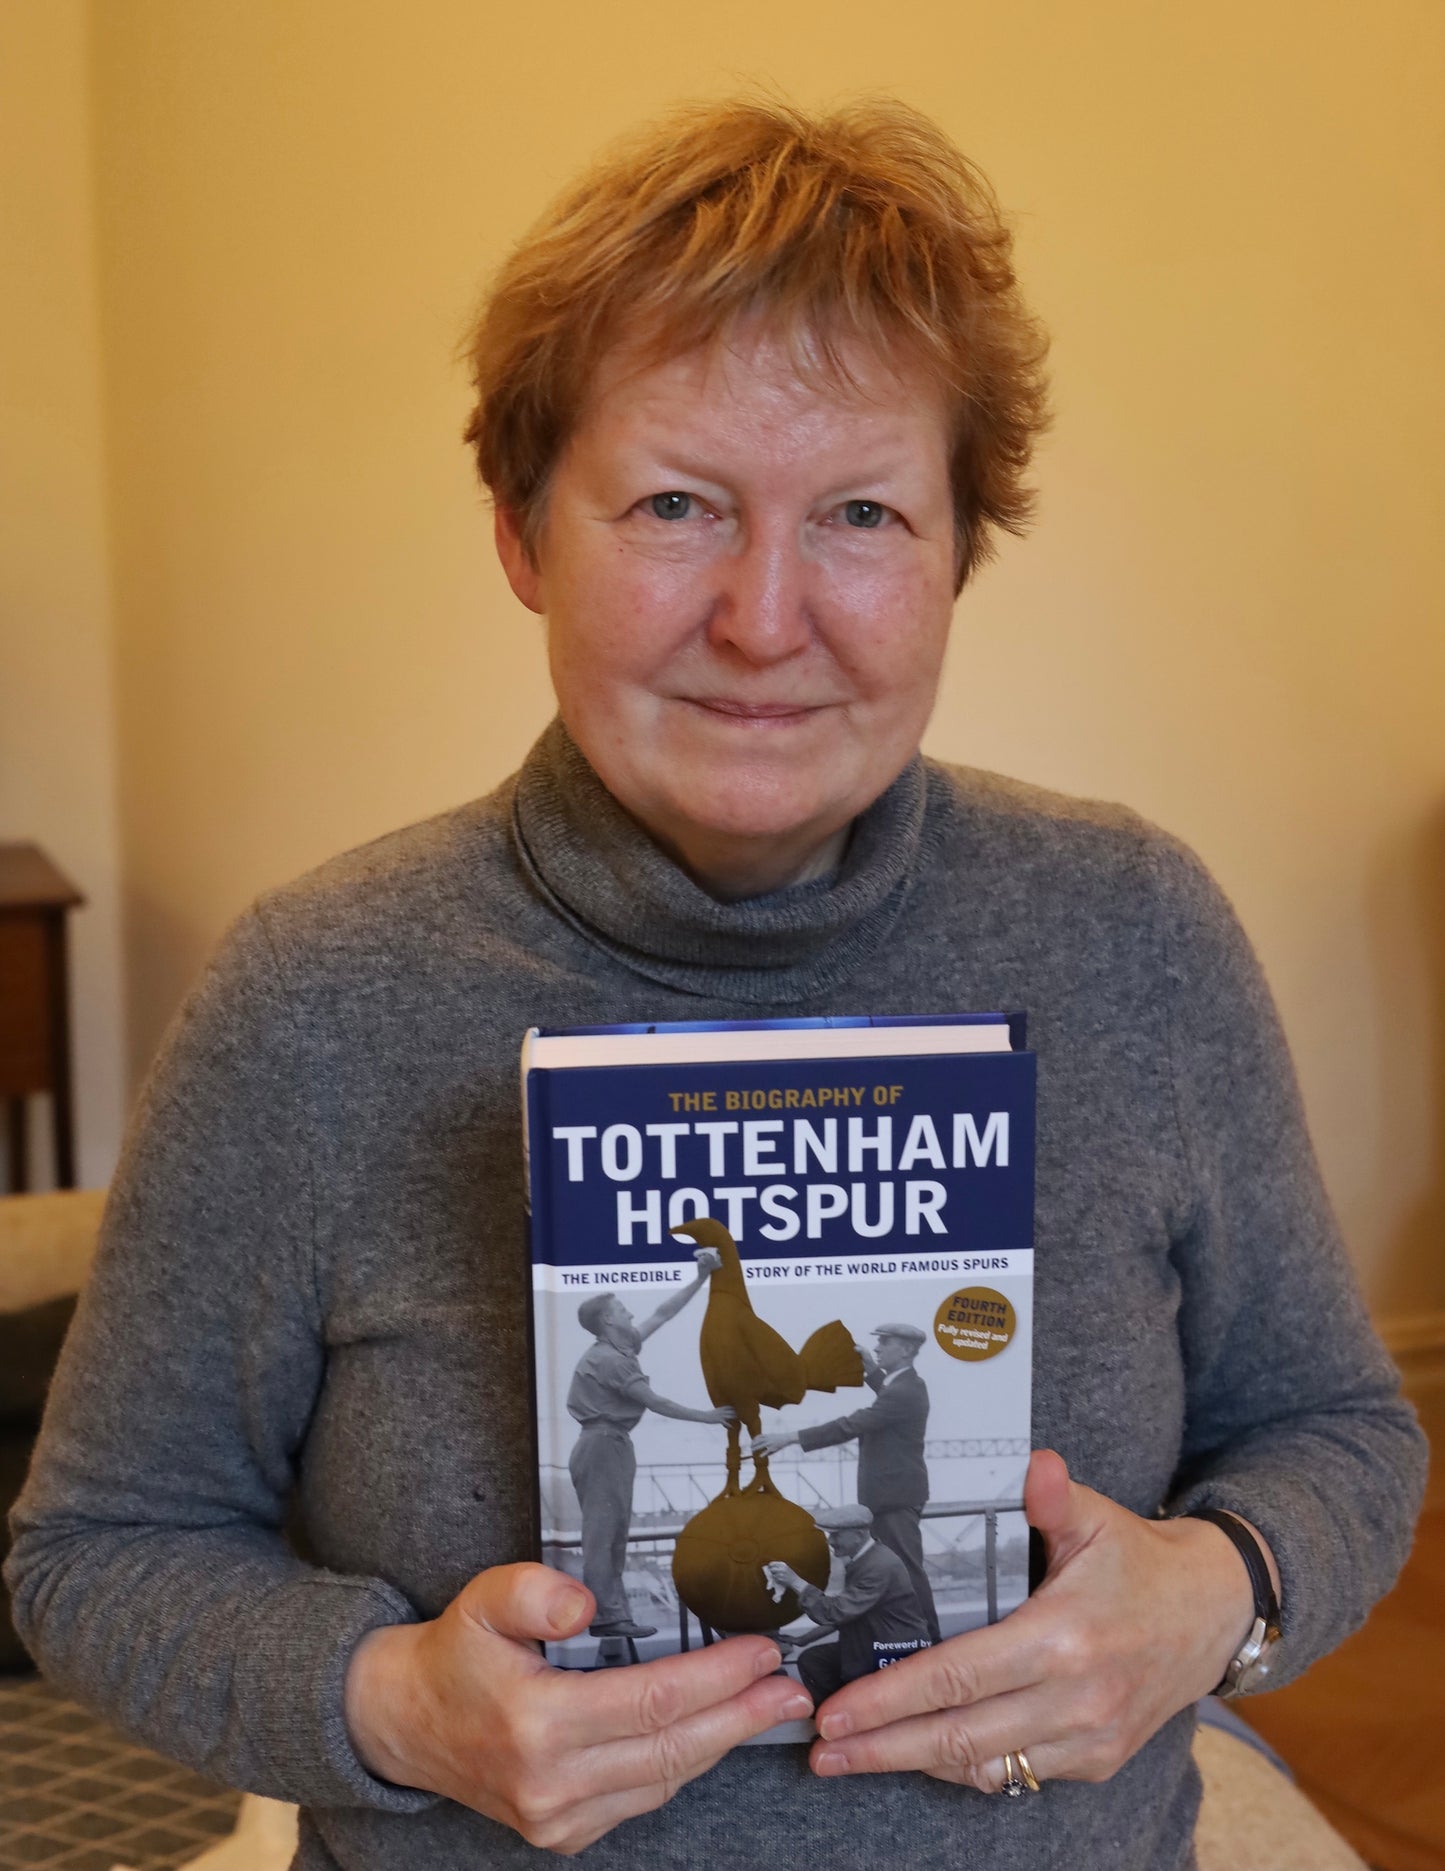 The Biography of Tottenham Hotspur - Signed by Julie Welch